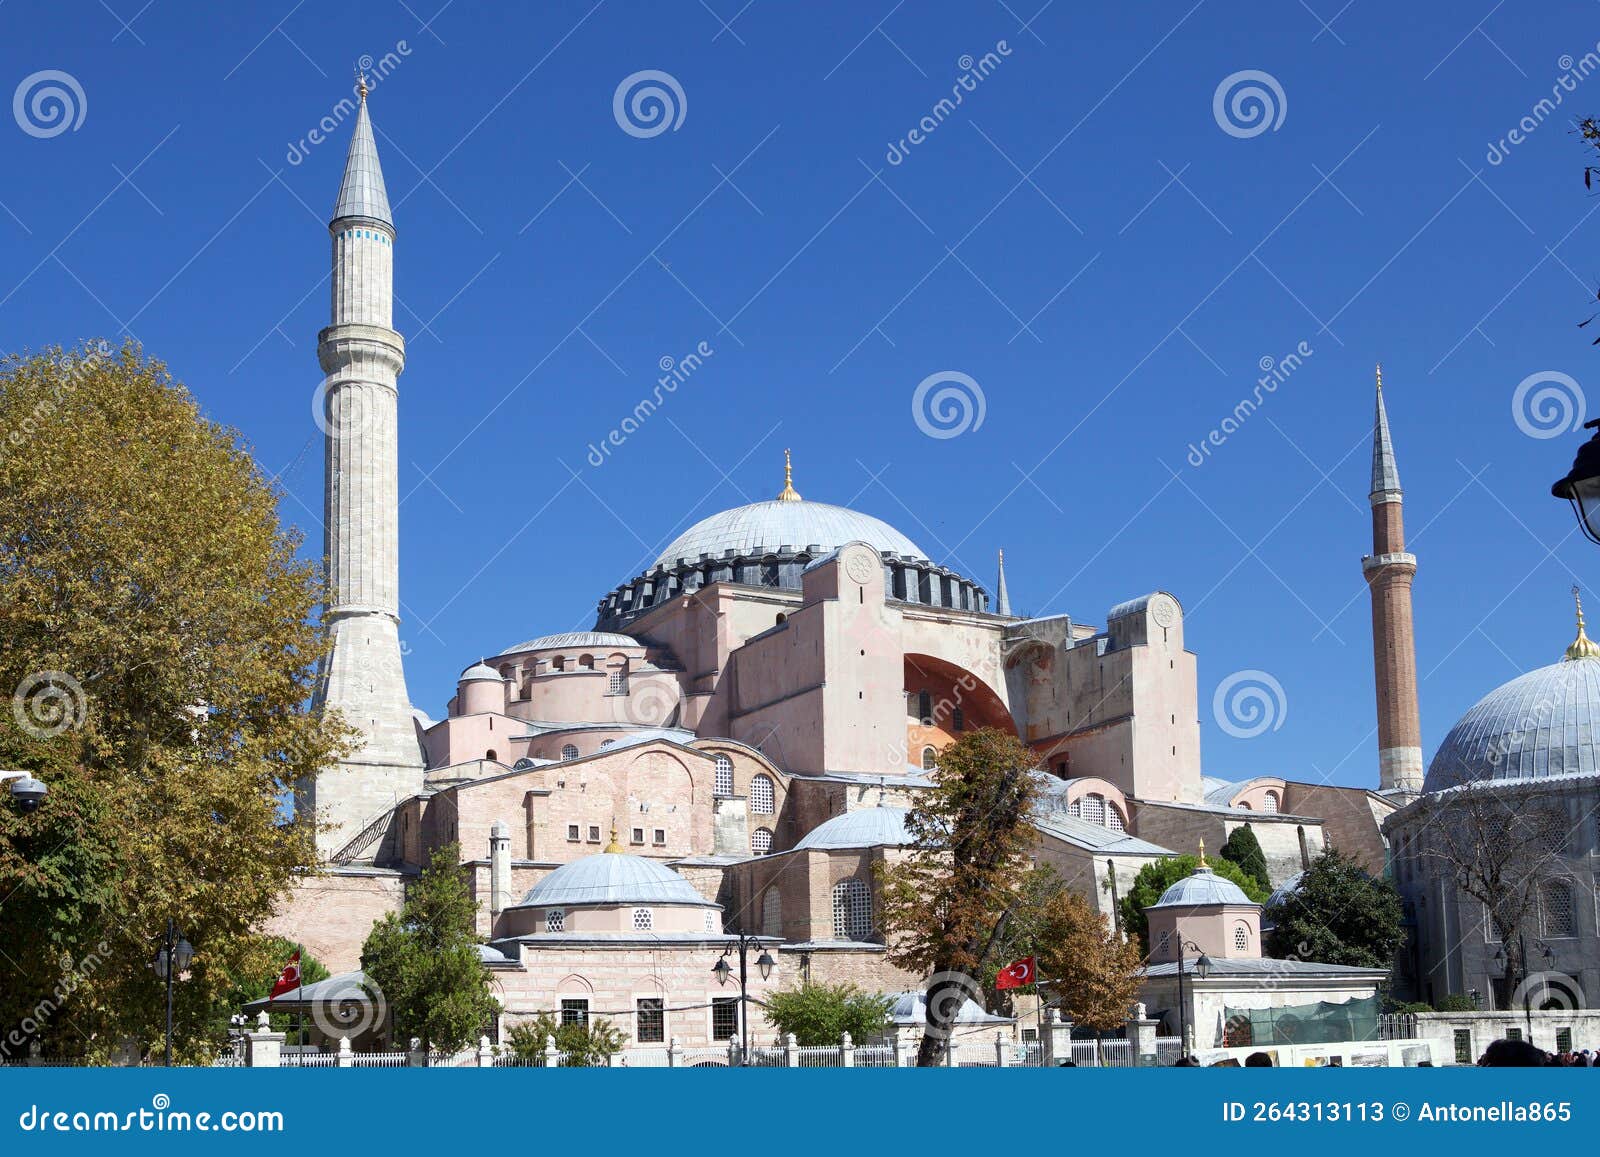 hagia sofia, istanbul, turkey. istanbul, formerly known as constantinople, is the largest city in turkey